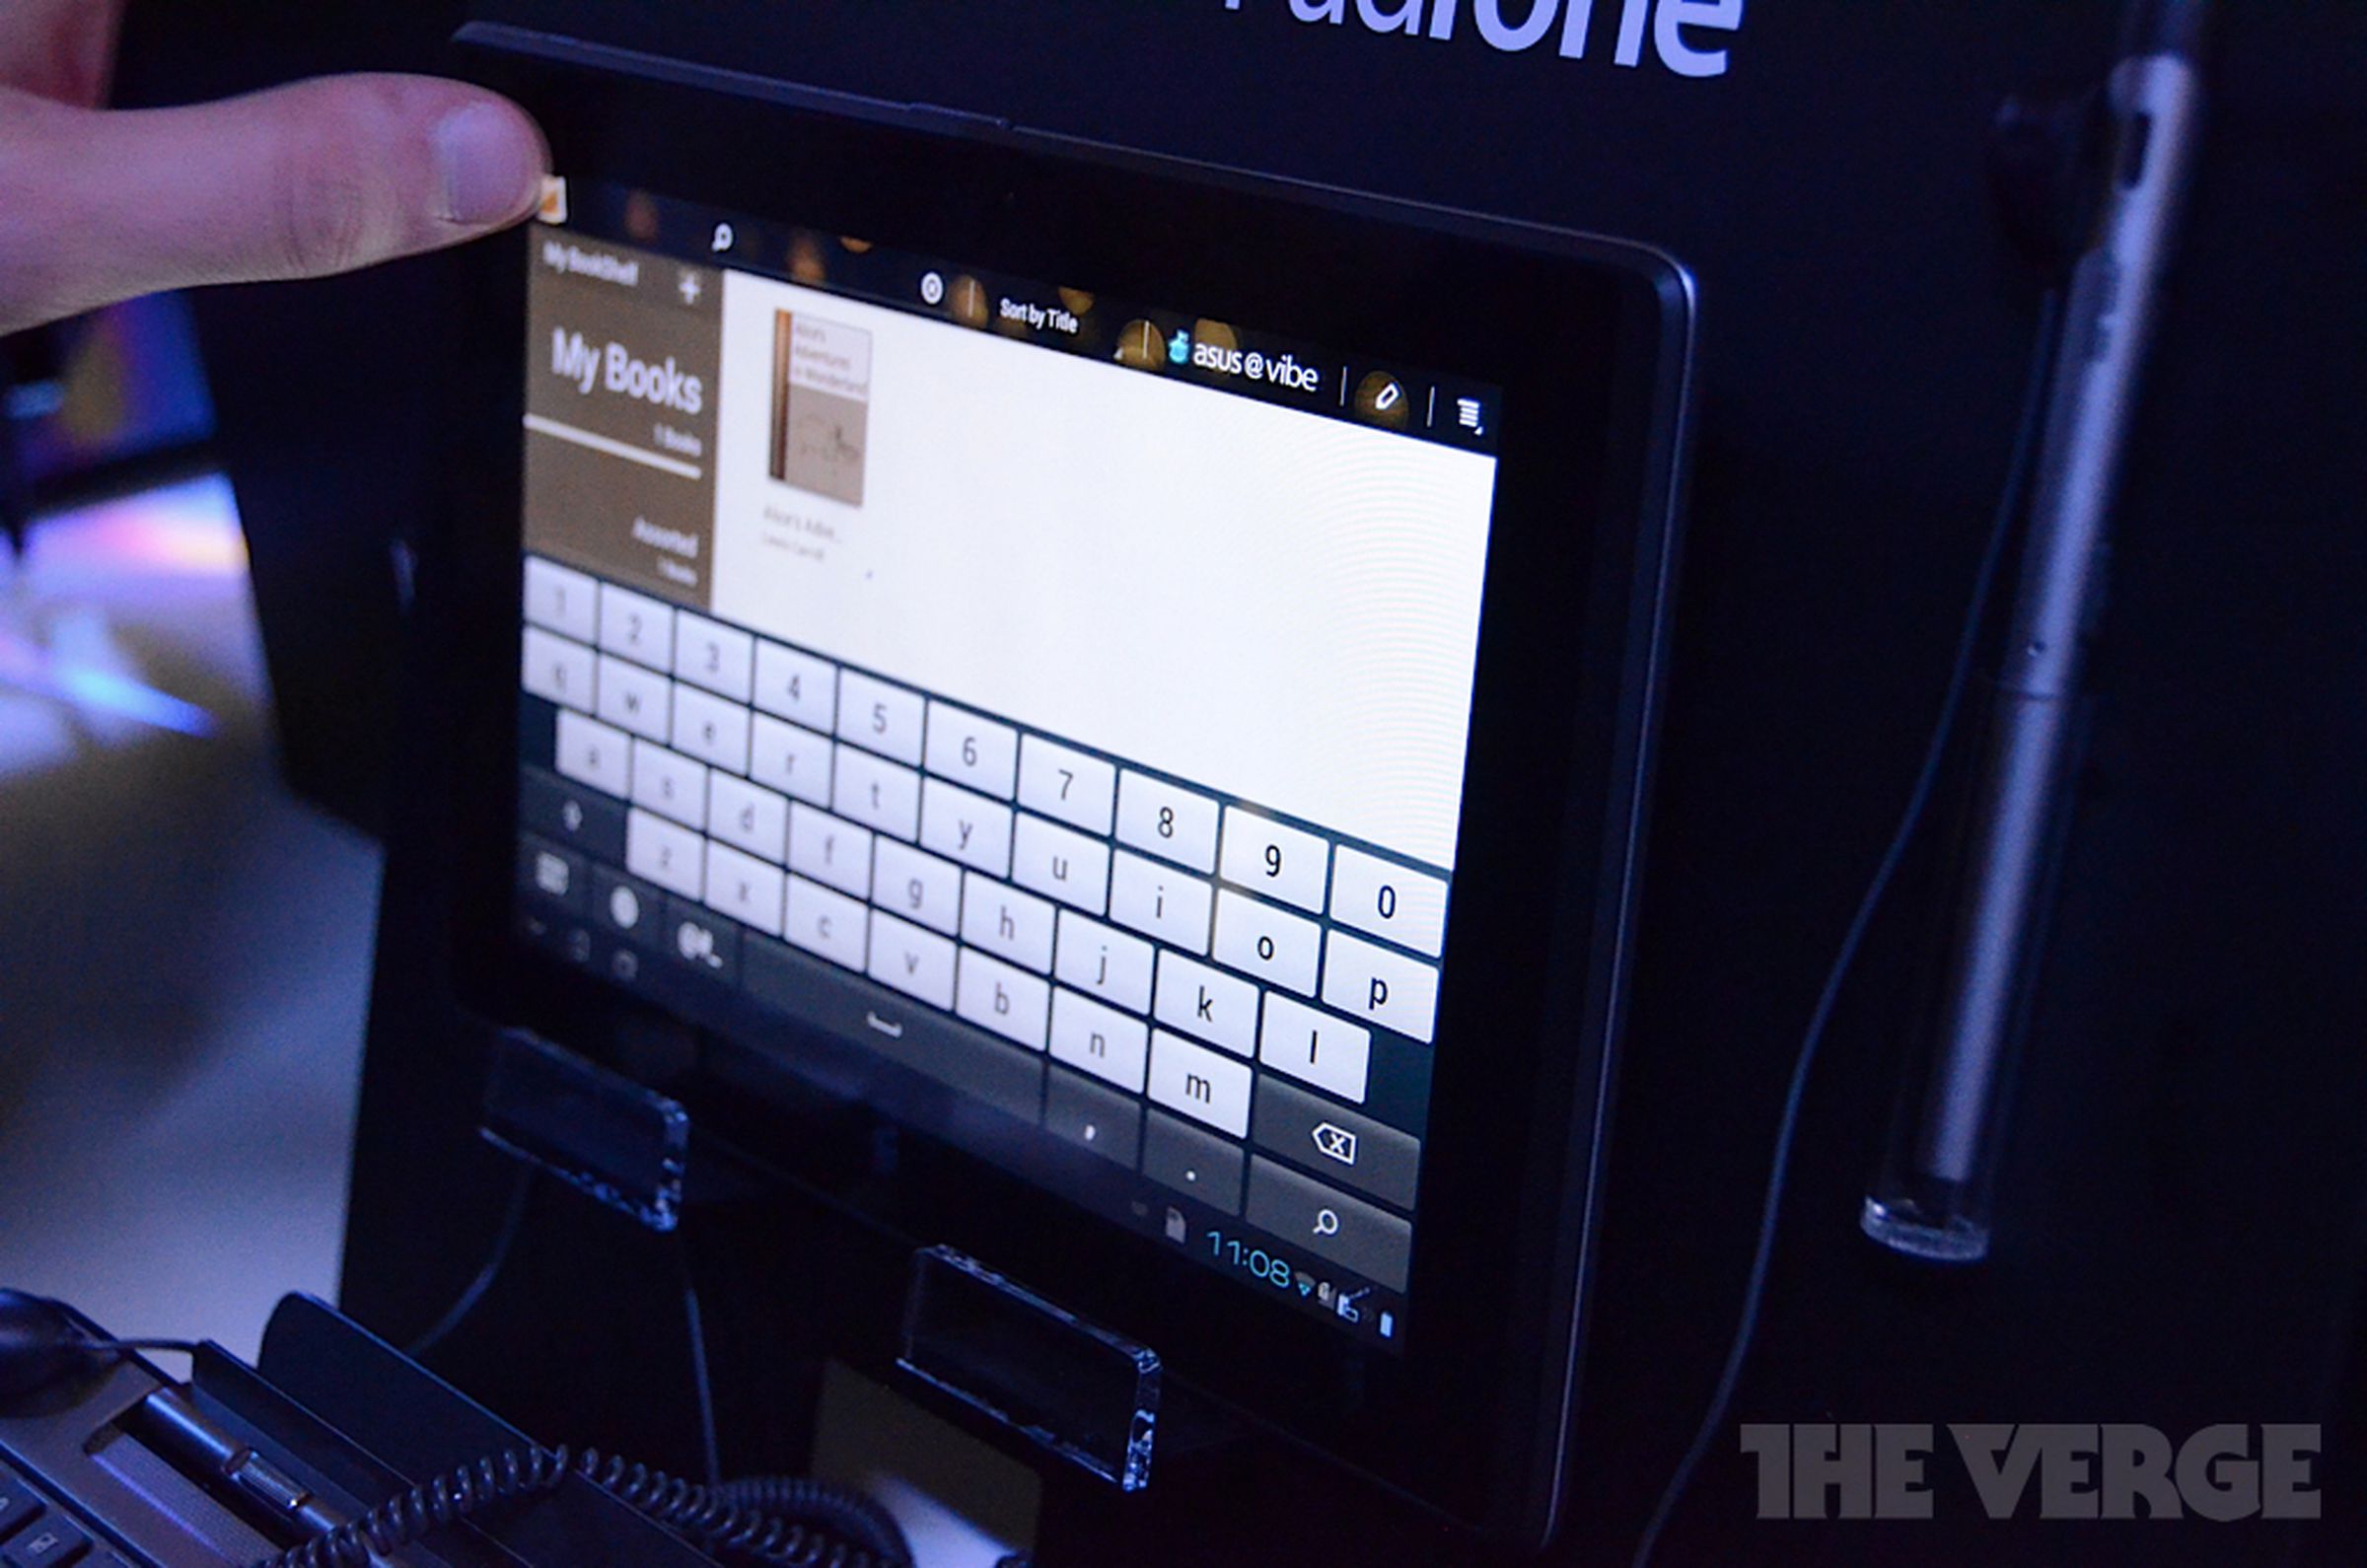 Asus Padfone MWC hands-on images